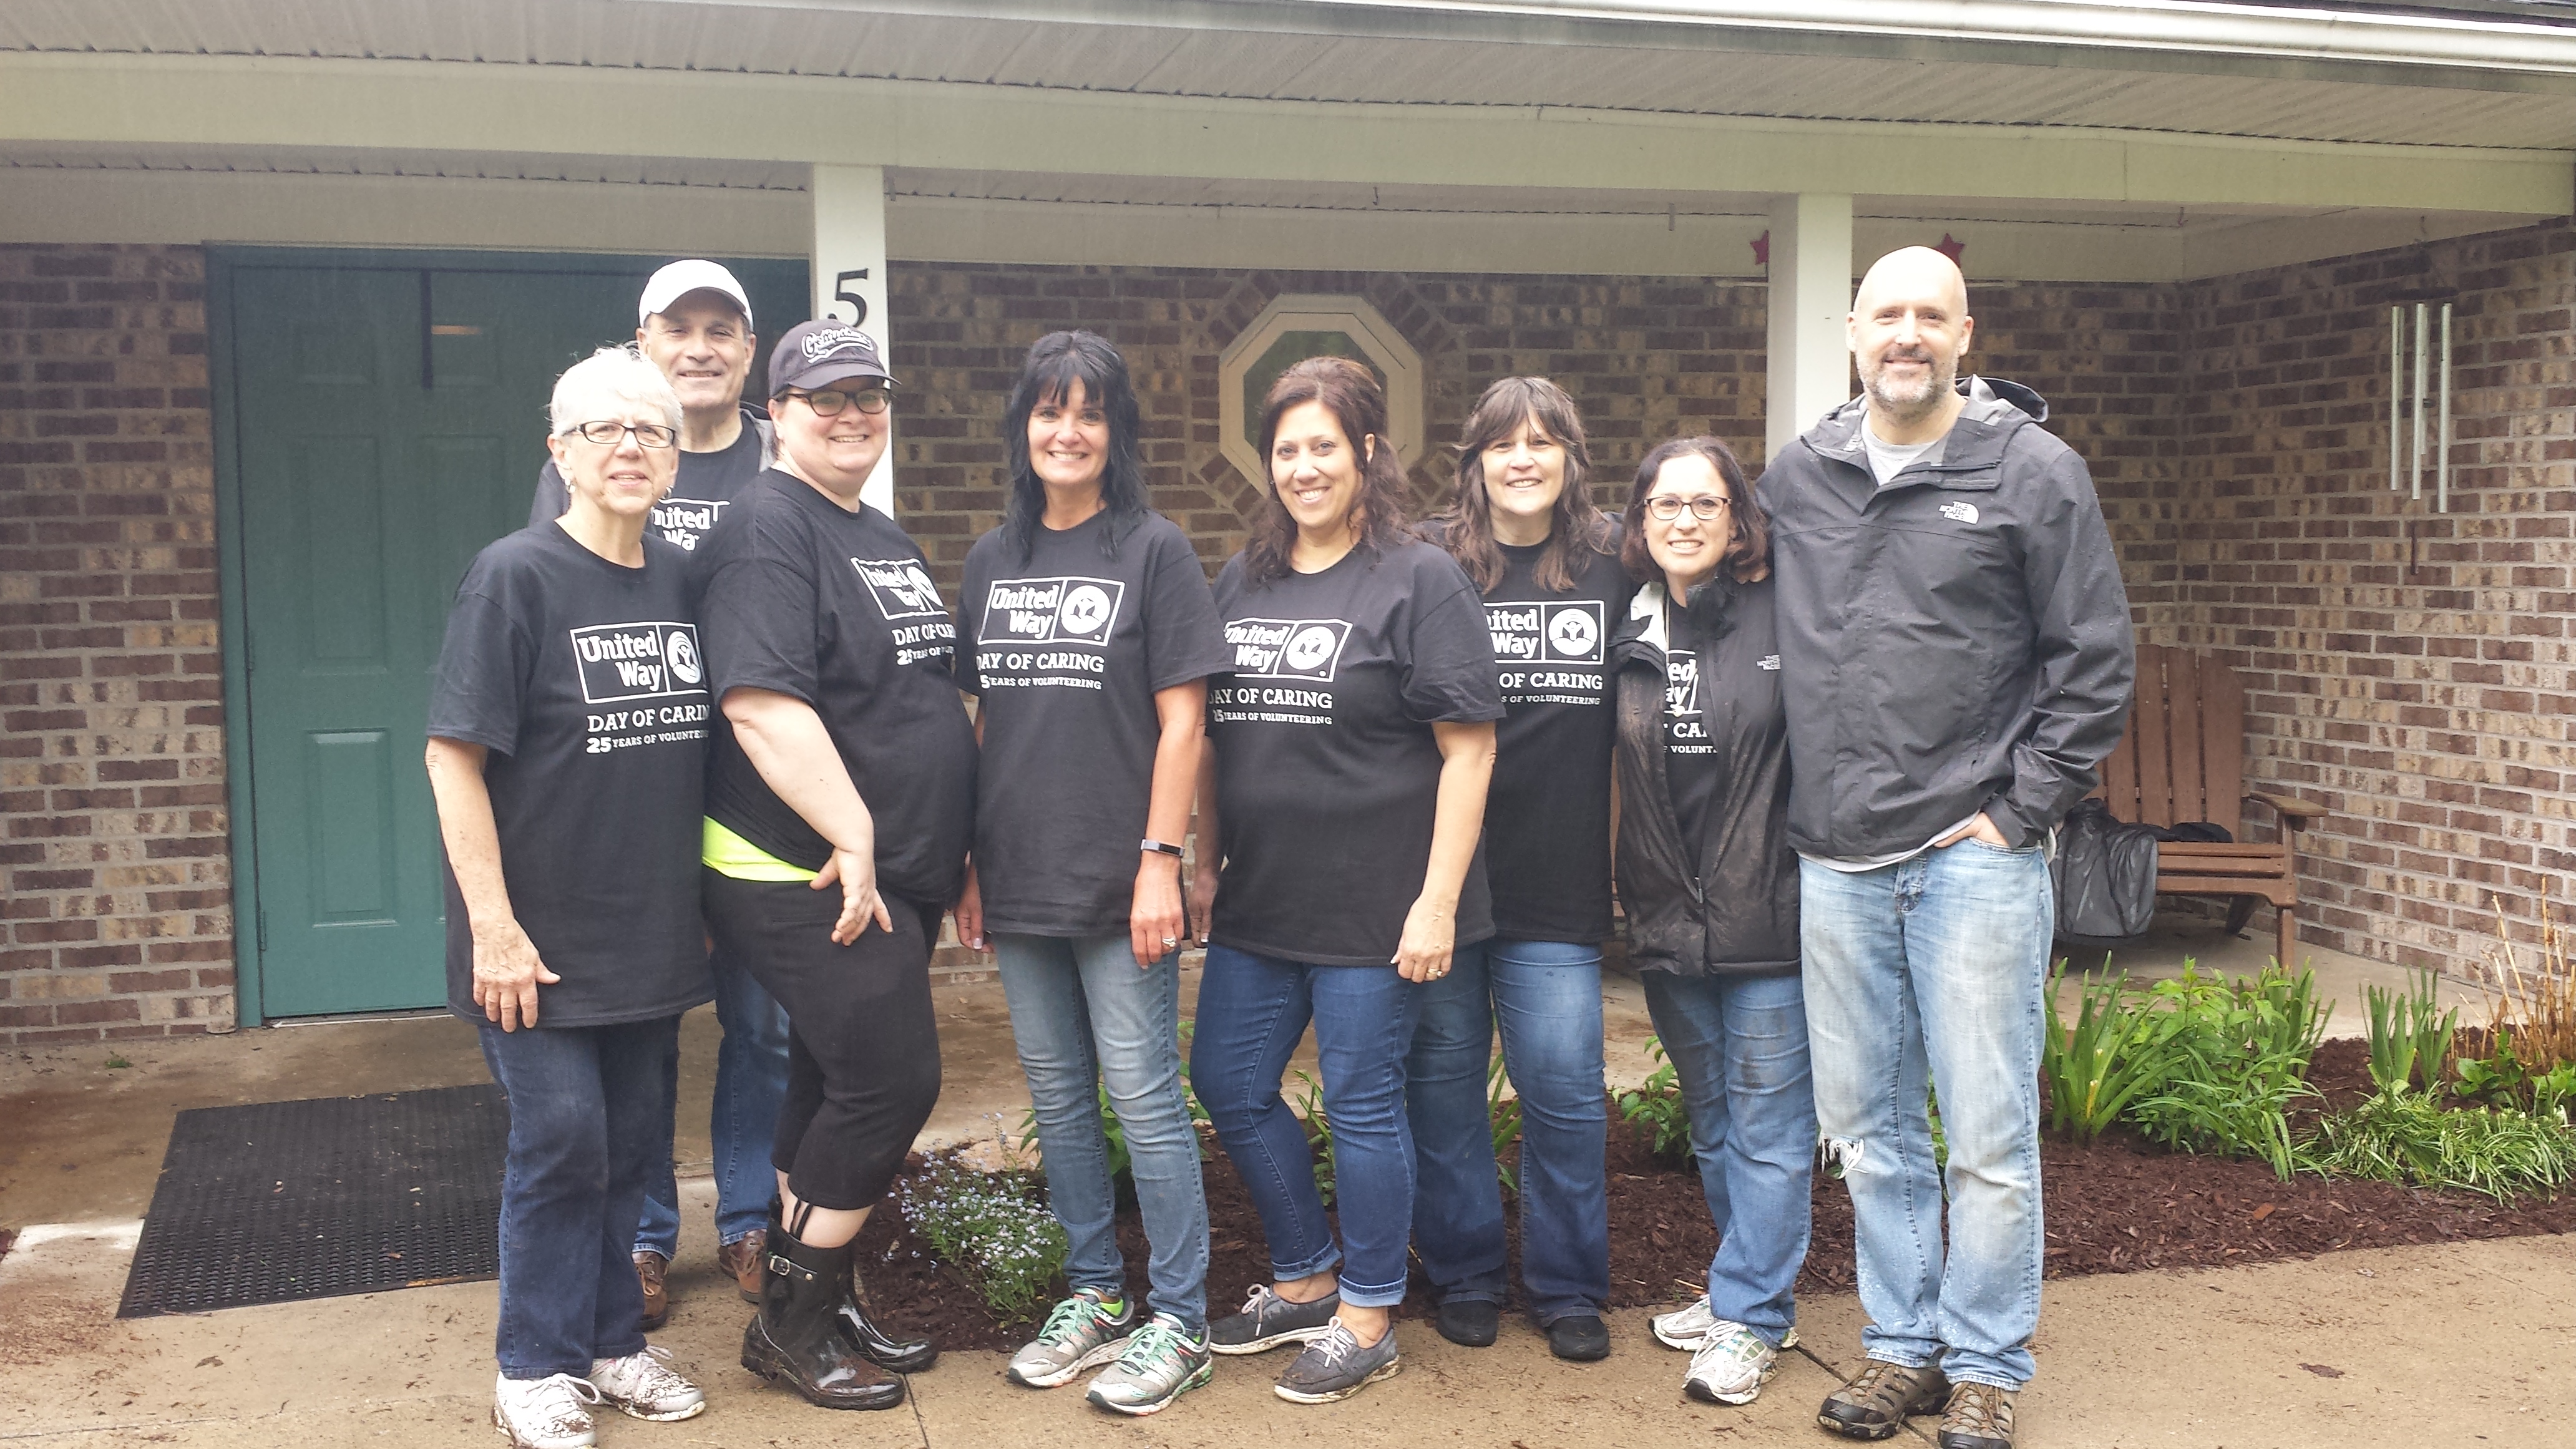 The Cooley Group Partners with the United Way Day of Caring